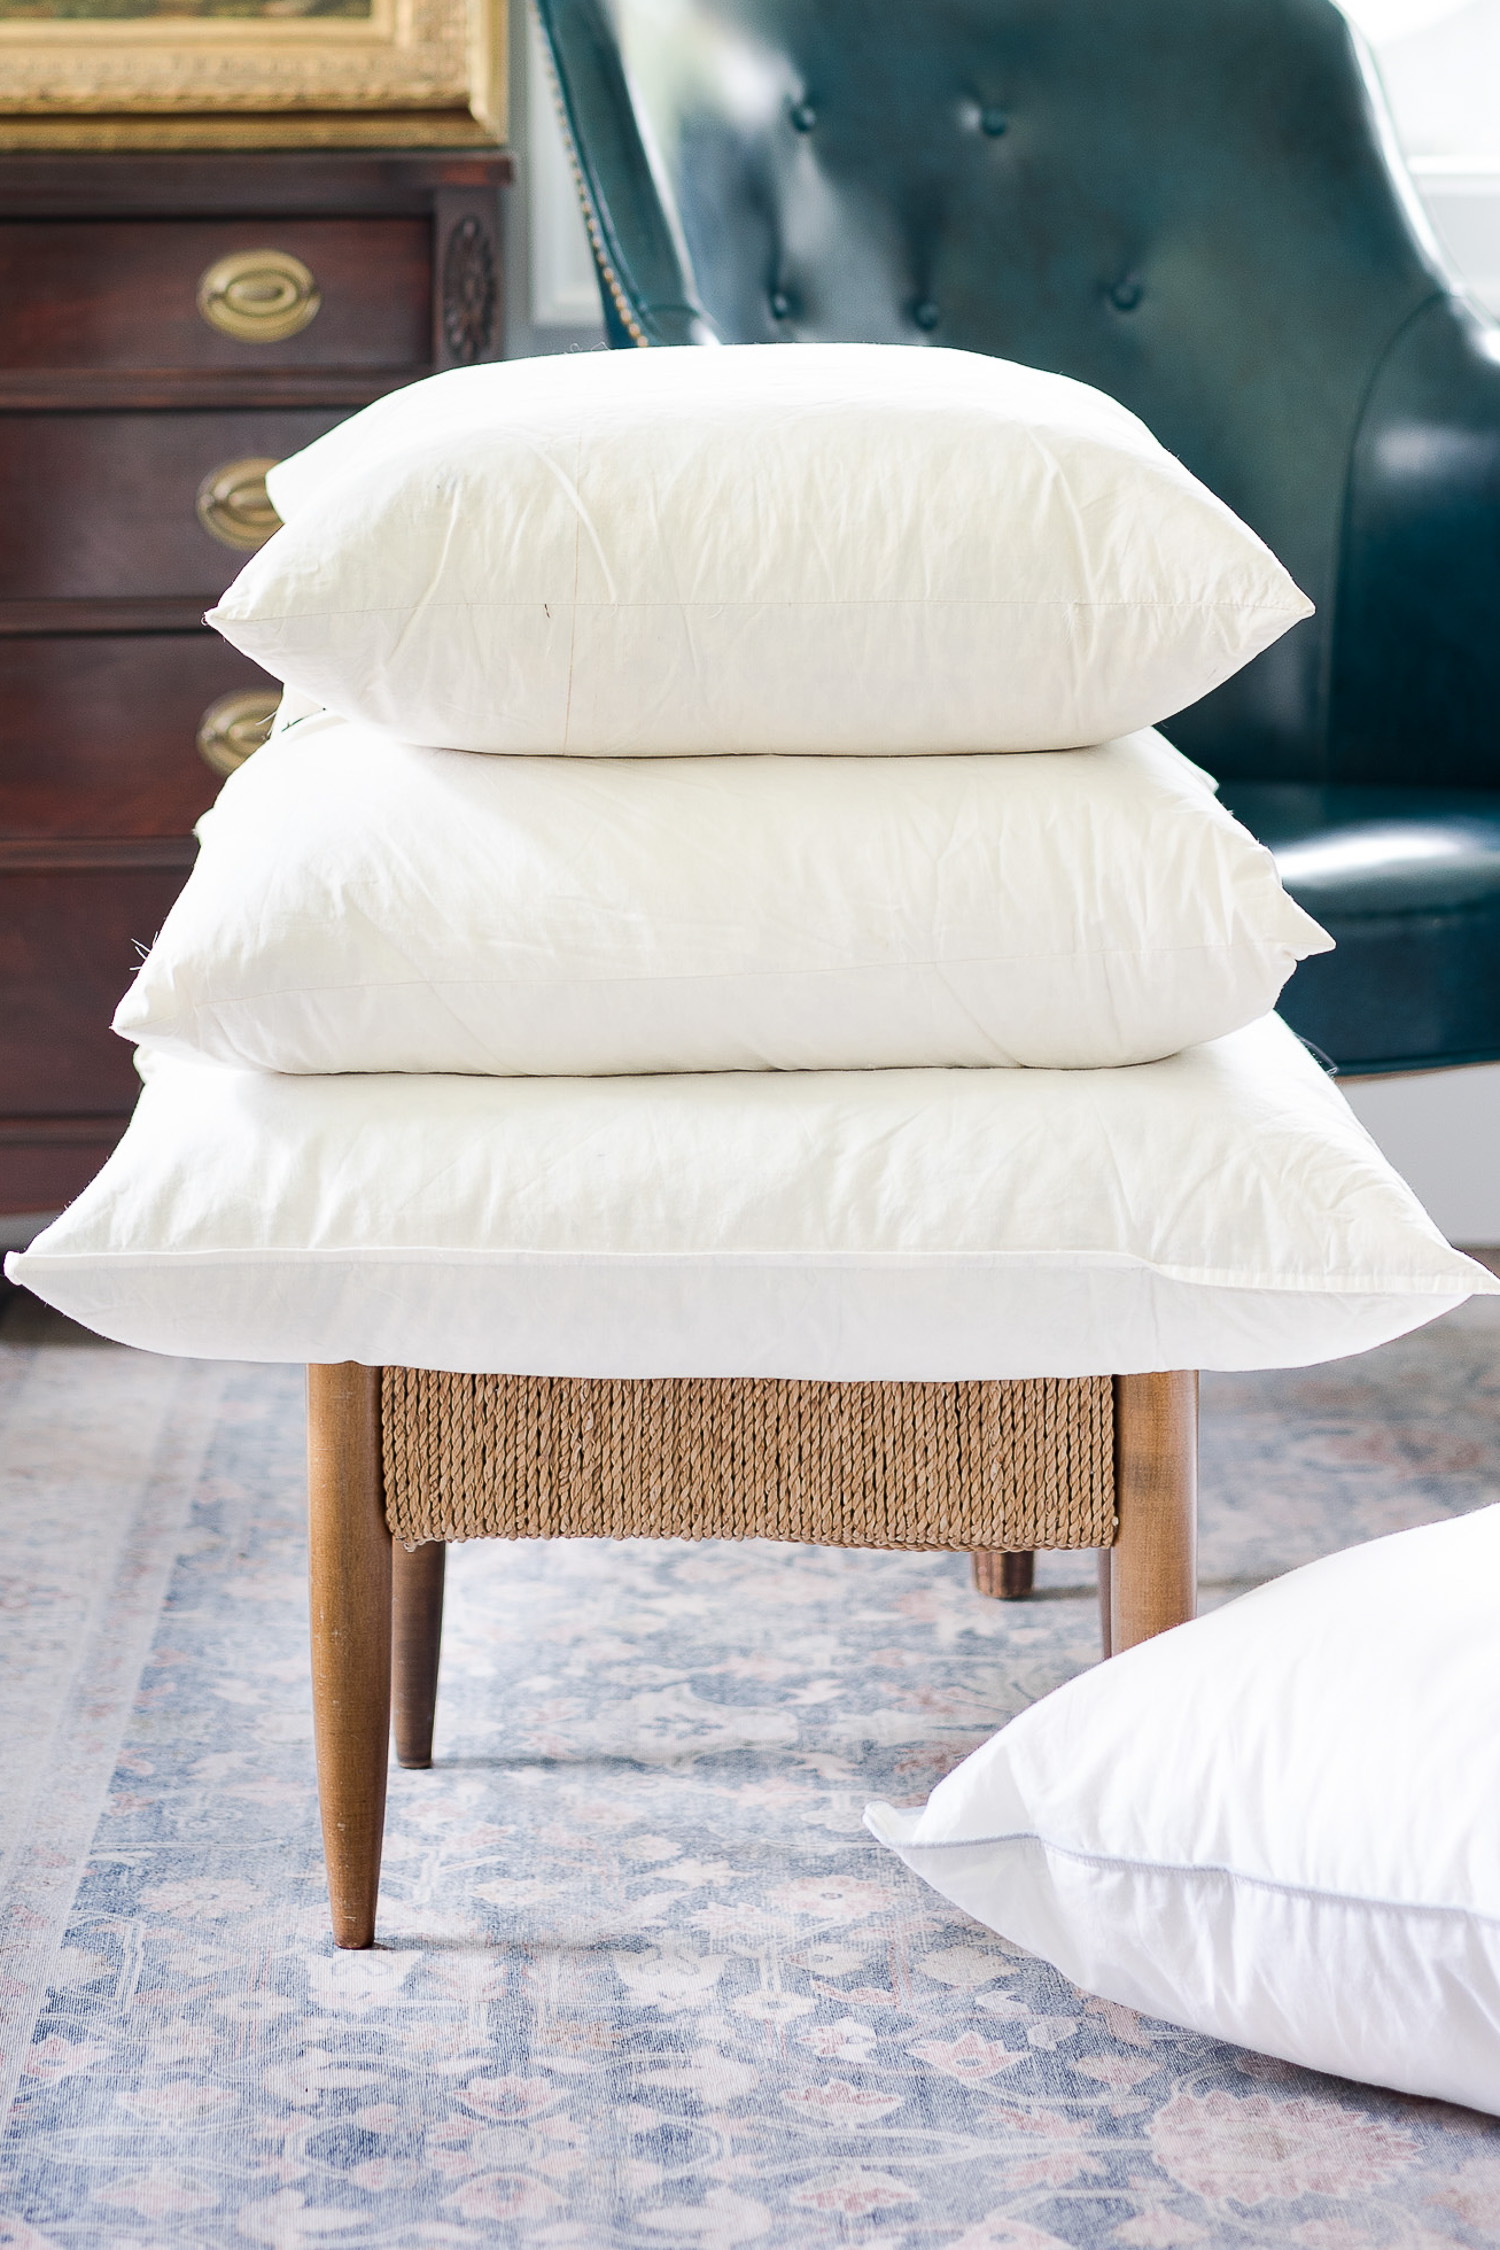 pillow inserts stacked on stool